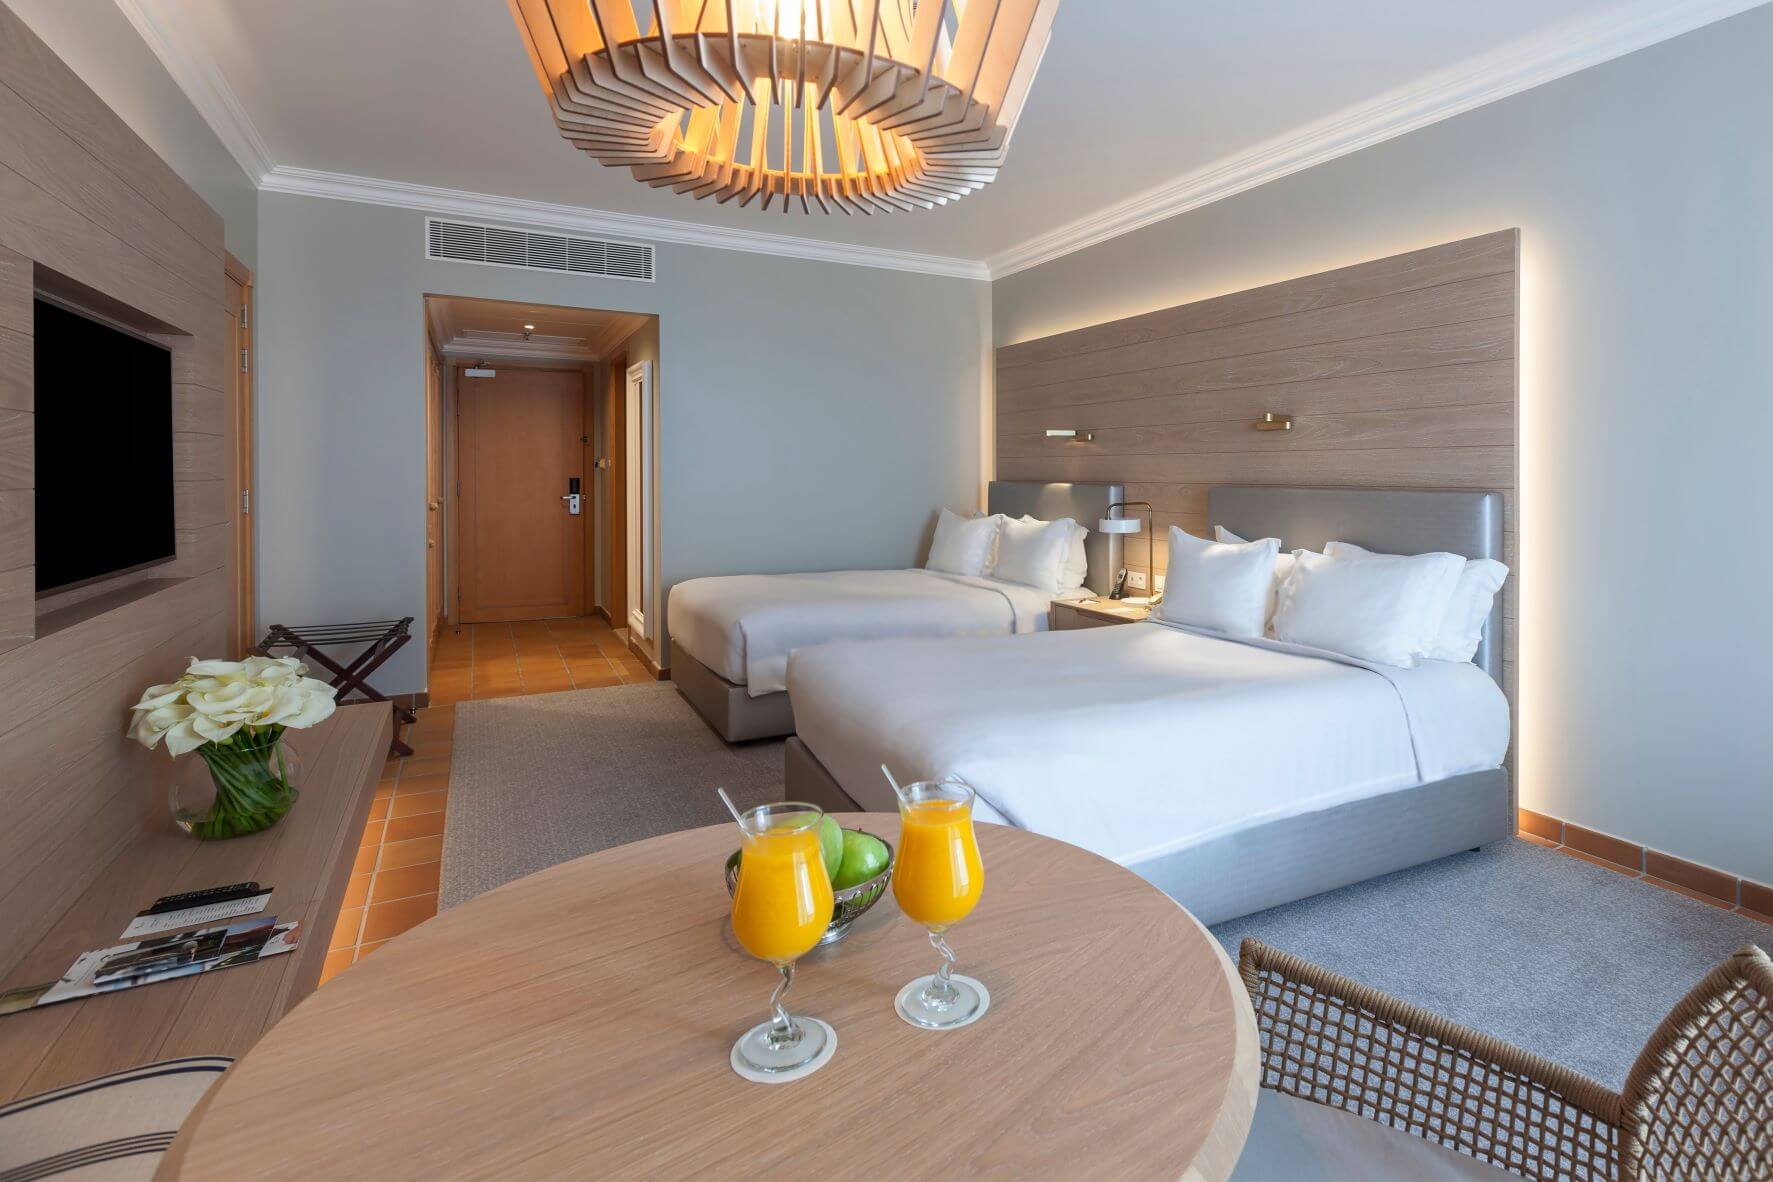 Twin bedroom at Marriott Praia D'El Rey Resort with television on wall, table with two glasses of orange juice on